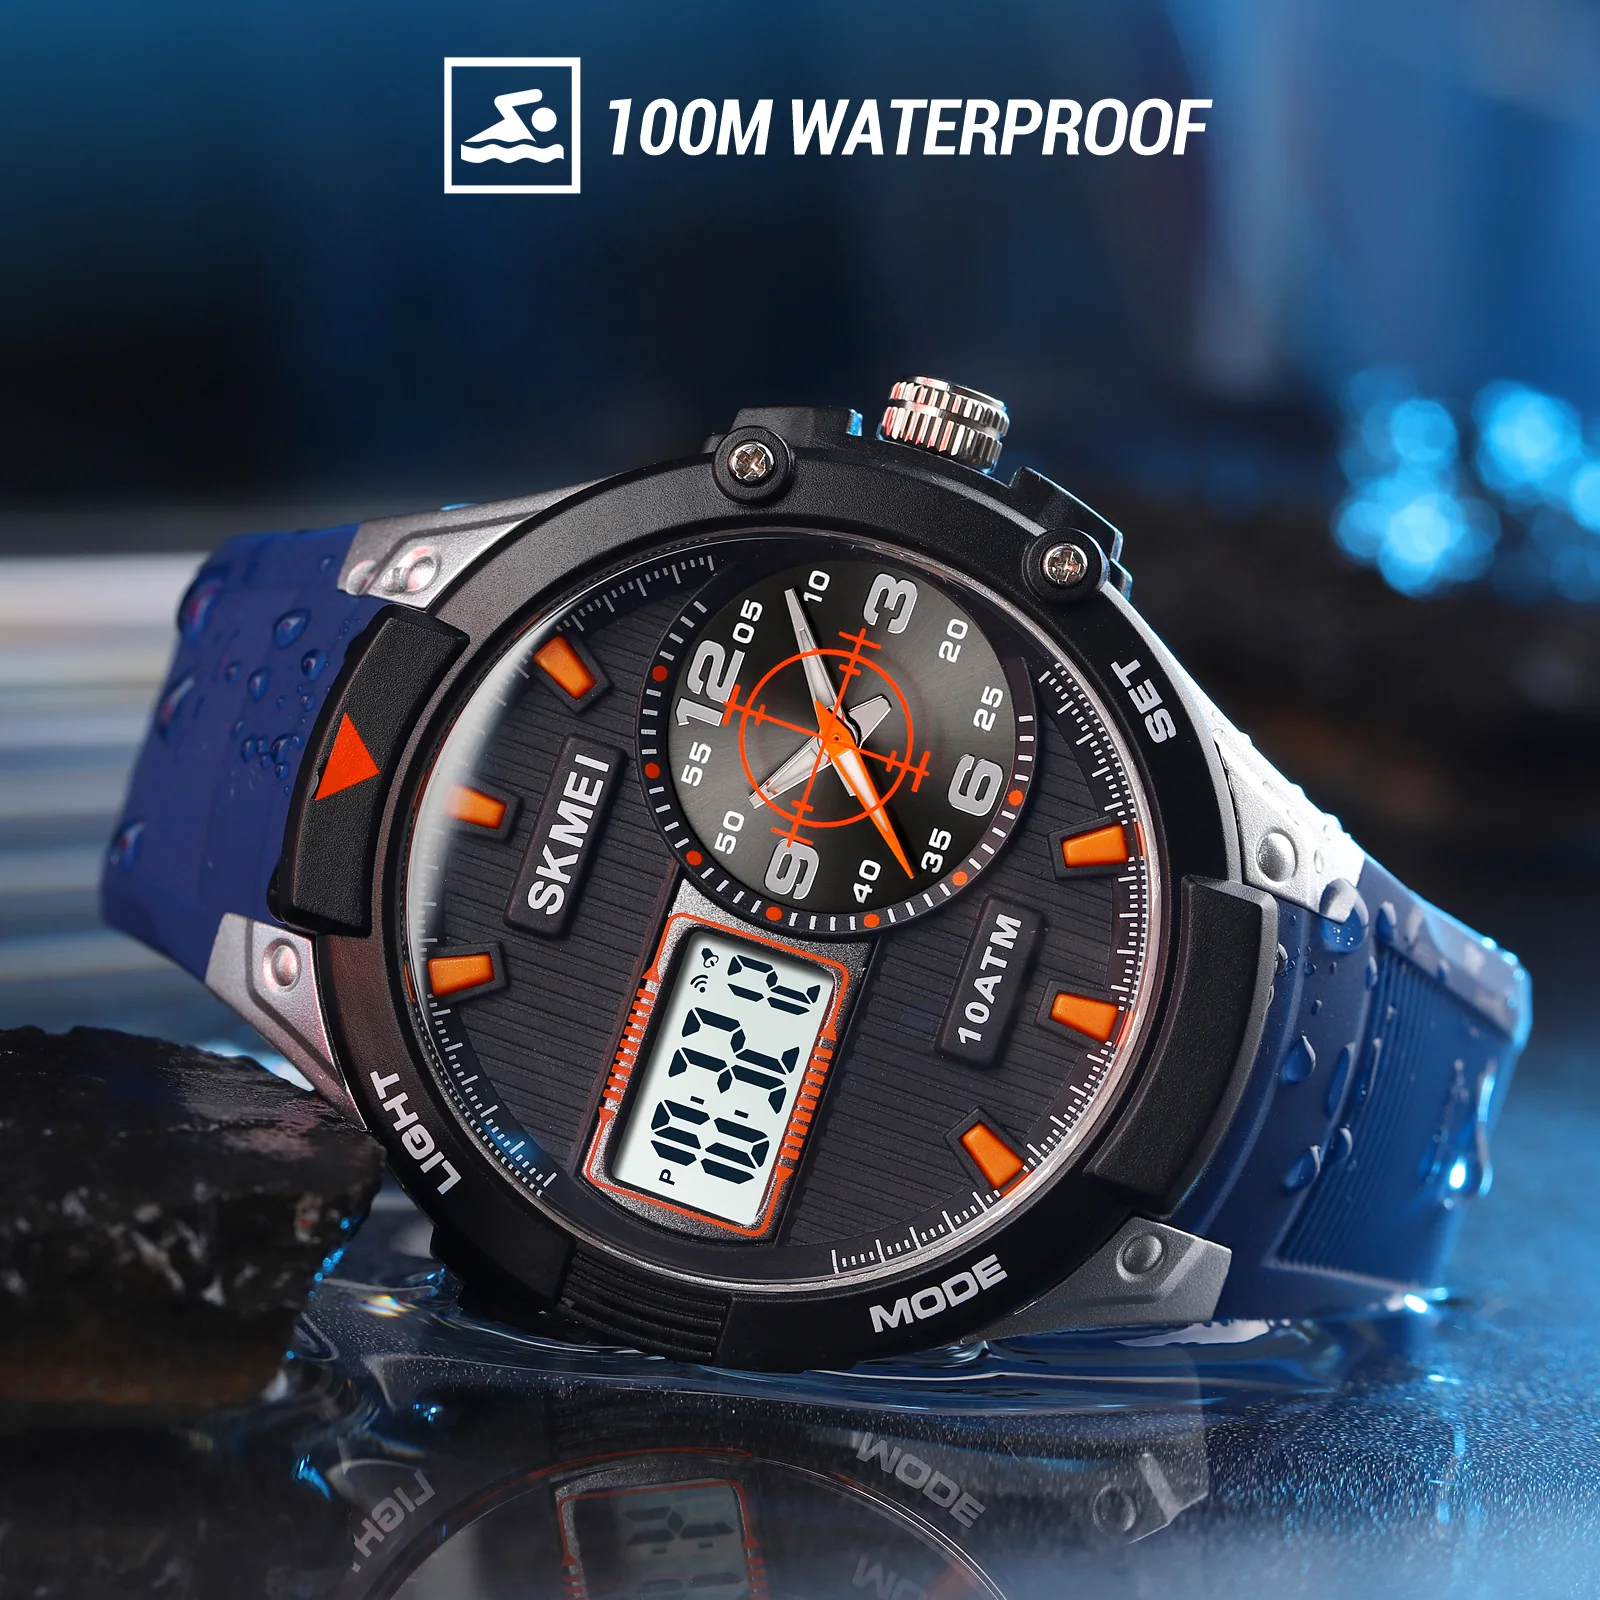 100m Waterproof Swim Sports Watches SKMEI Brand Military Men Wristwatches 3 Time Stopwatch Alarm Digital Clock Relogio Masculino qm vintage pilot watch us american 113a aviation military special forces 100m unisex swimming sprot flight time clock 8023ab